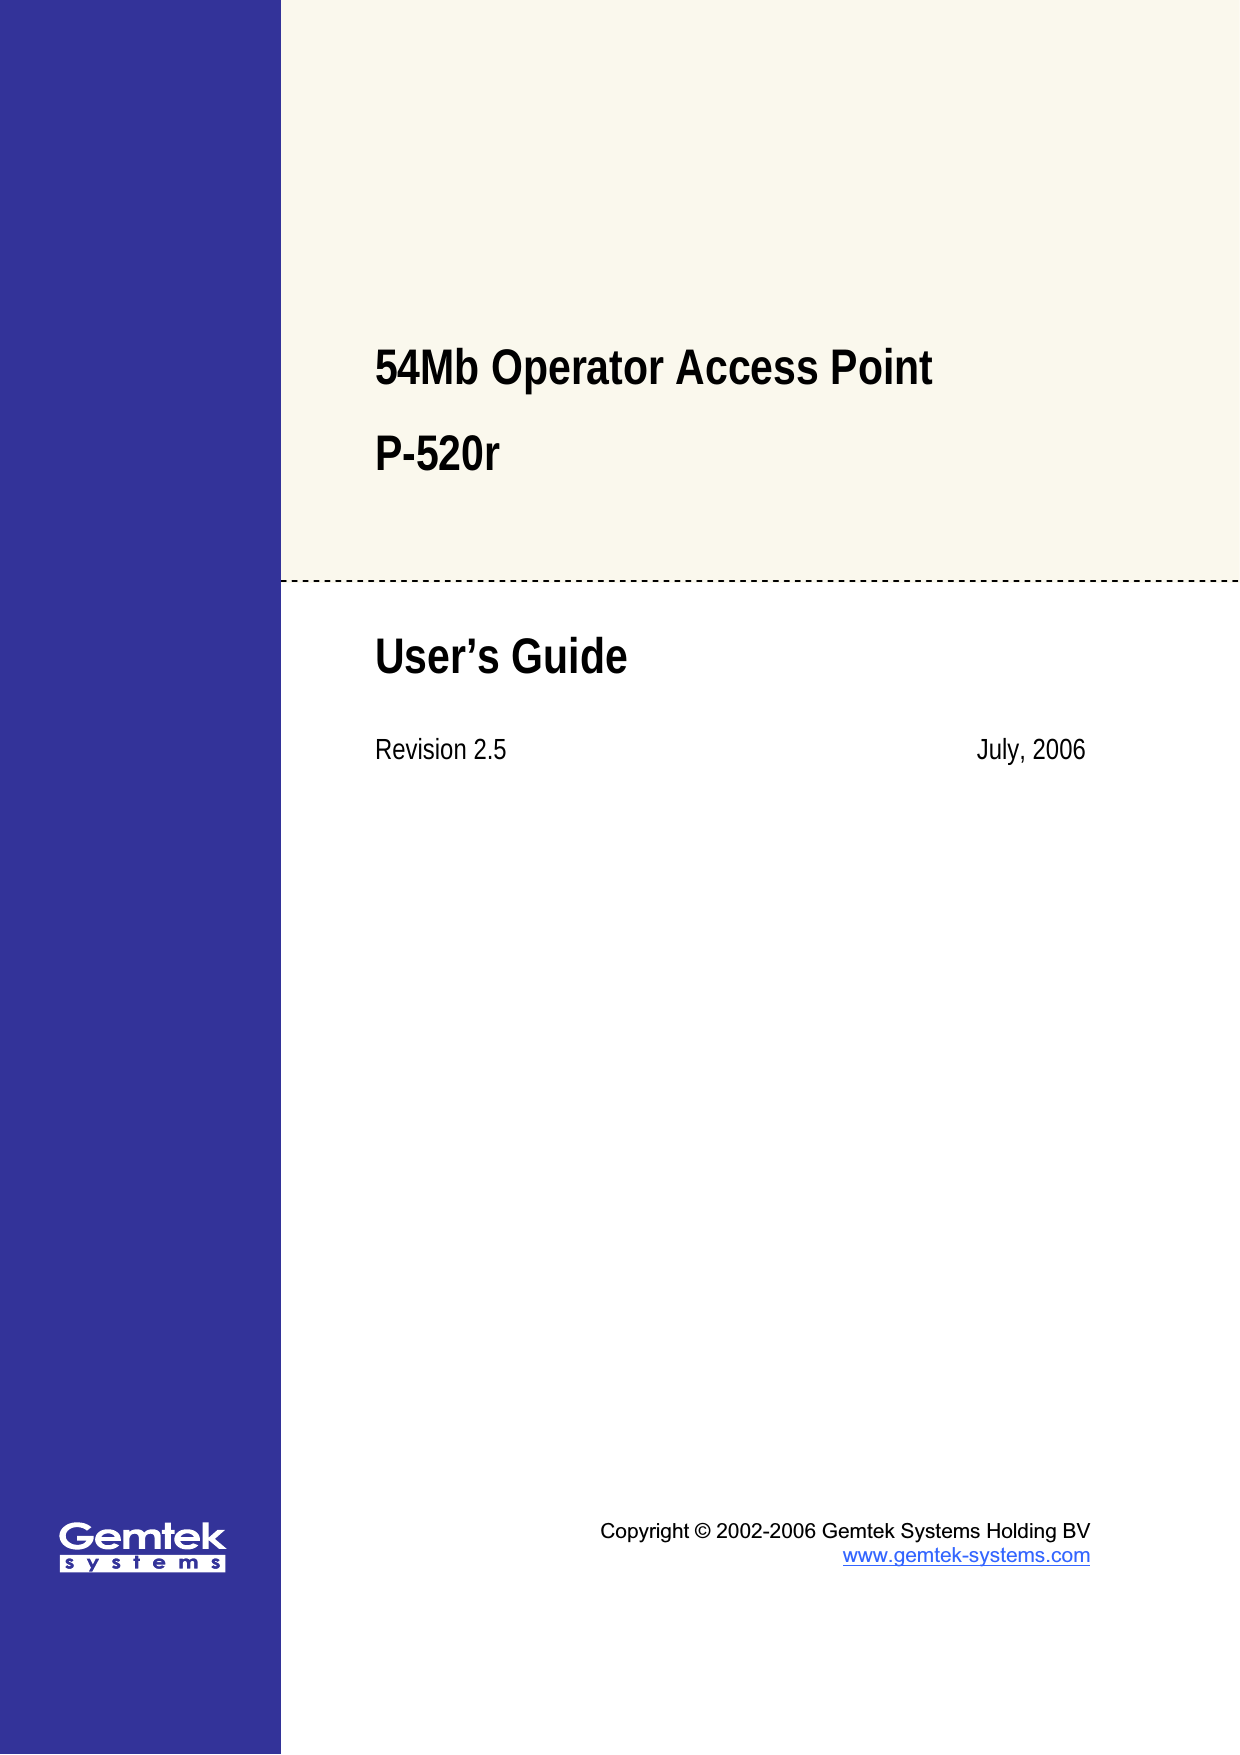 54Mb Operator Access Point P-520rUser’s Guide Revision 2.5 July, 2006Copyright © 2002-2006 Gemtek Systems Holding BV www.gemtek-systems.com